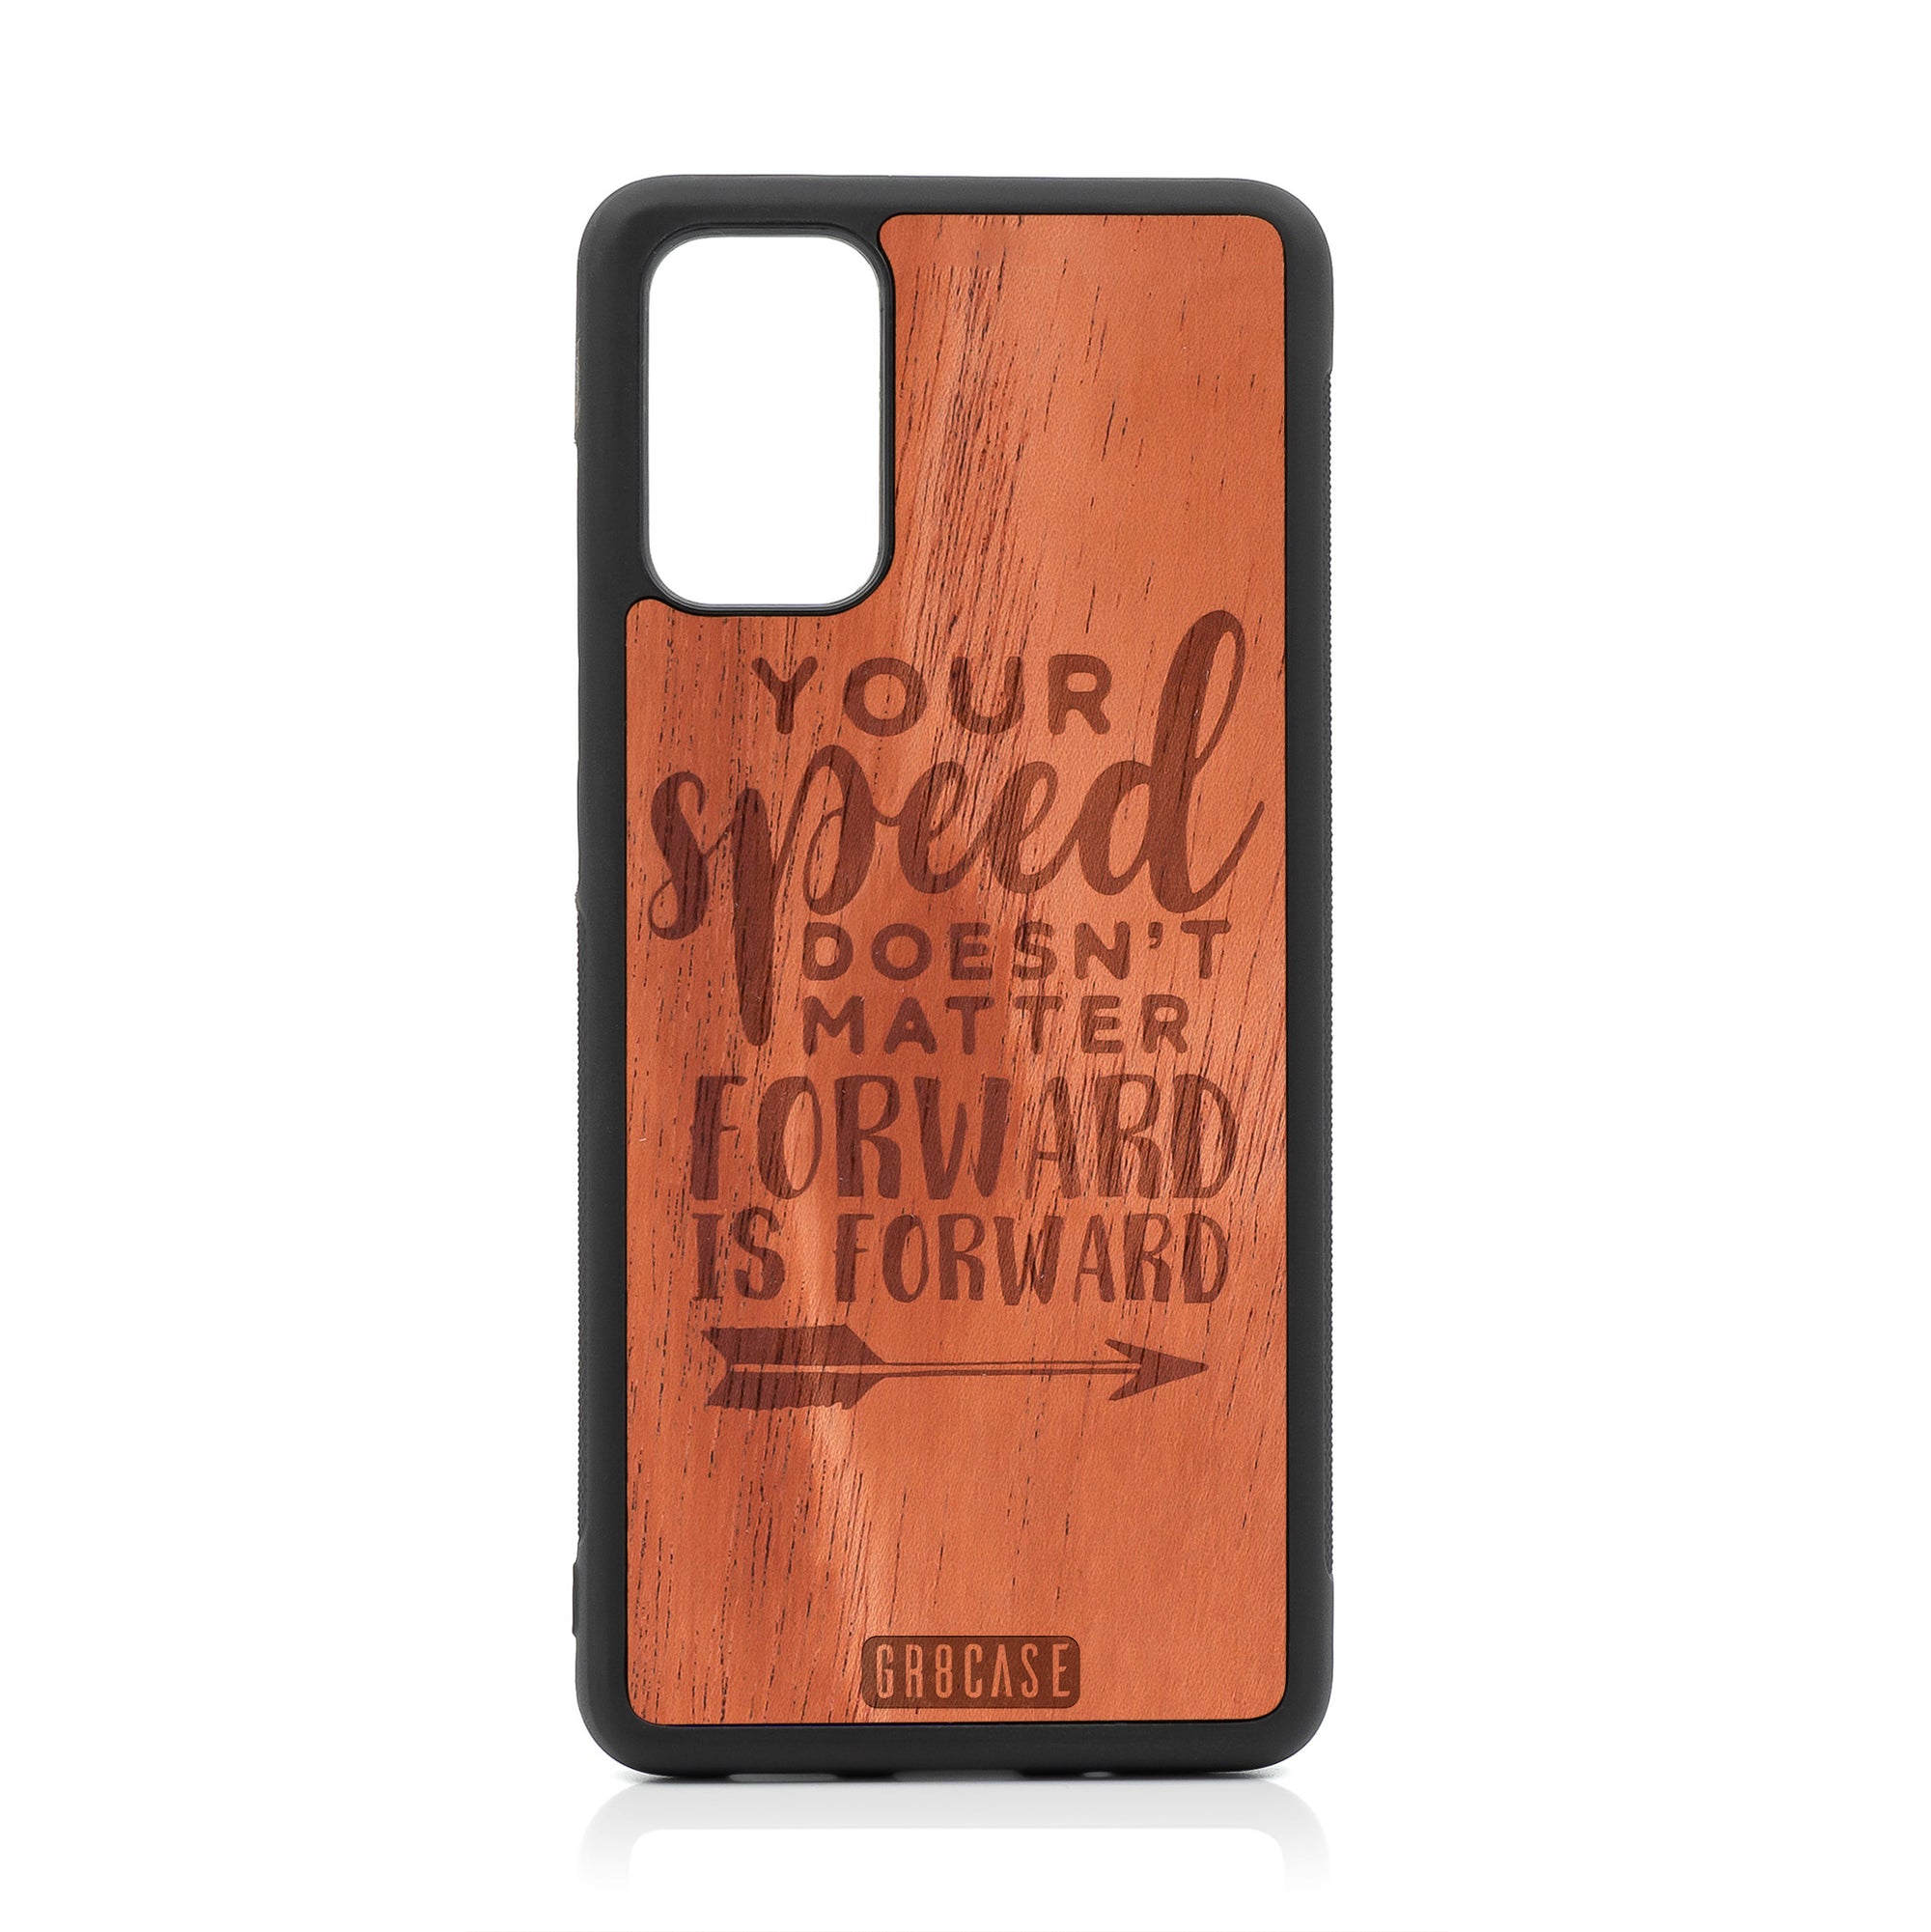 Your Speed Doesn't Matter Forward Is Forward Design Wood Case For Samsung Galaxy S20 Plus